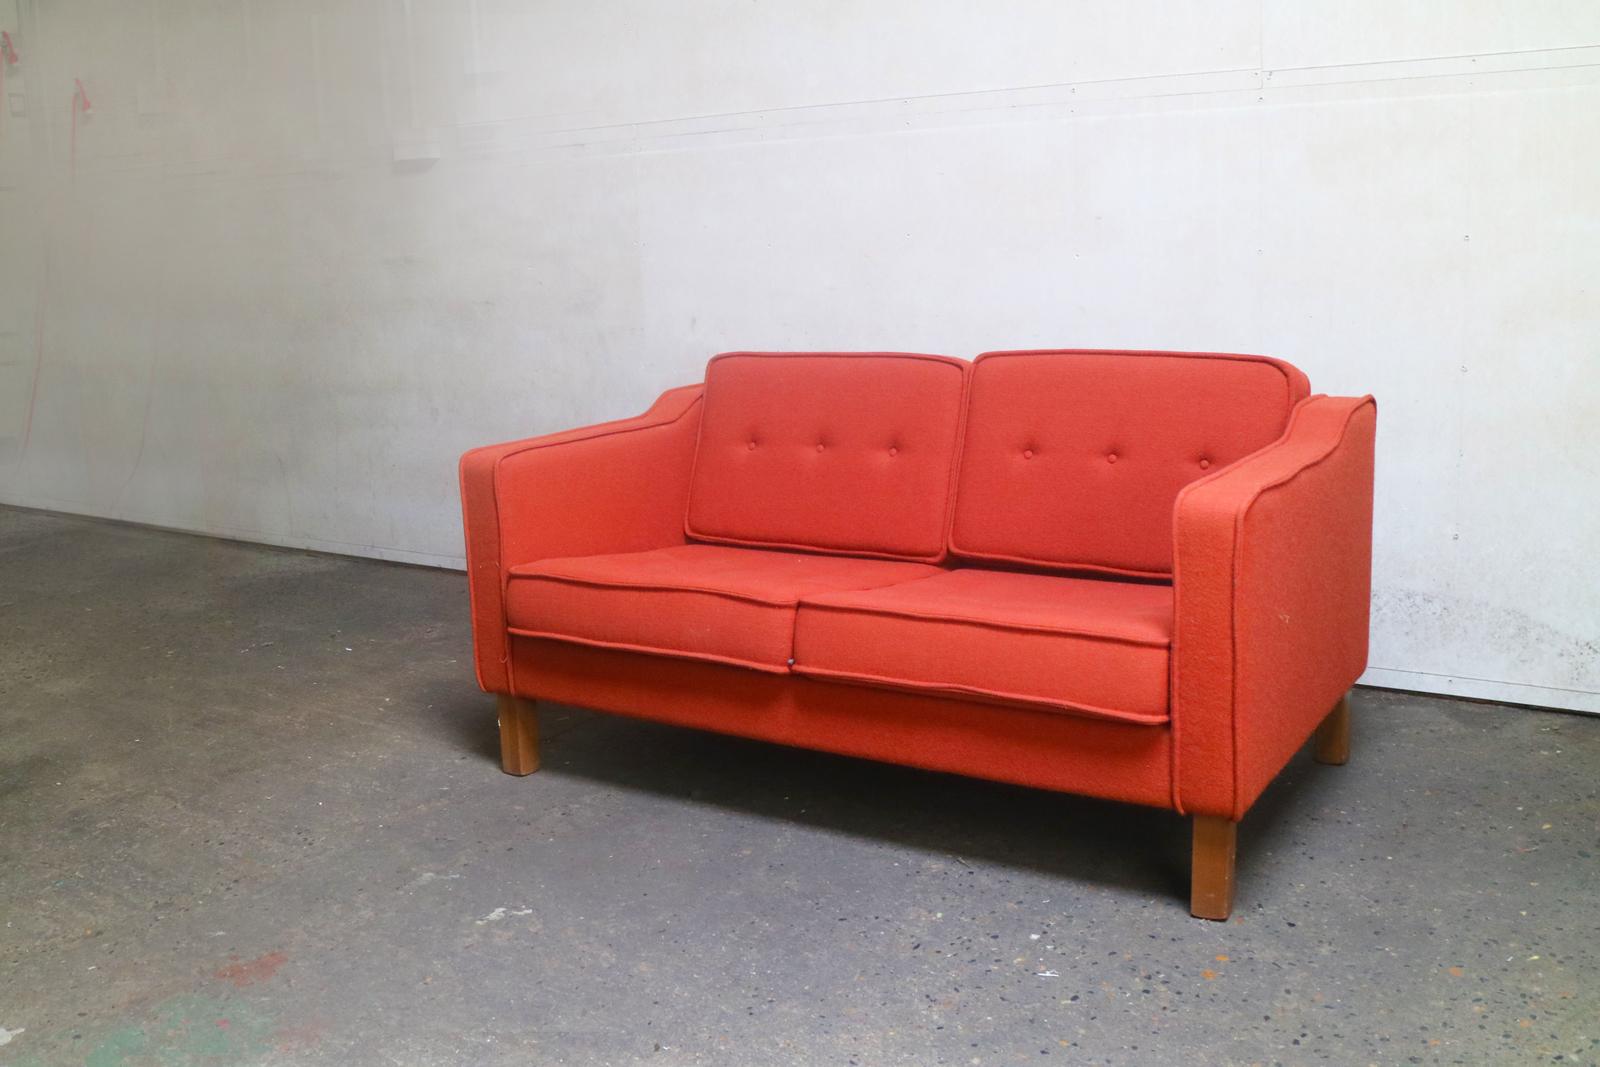 Danish Mid-Century Modern sofa, with the original brick red woollen upholstery, with button detailing. In superb condition. Sits on oak feet.
 
  